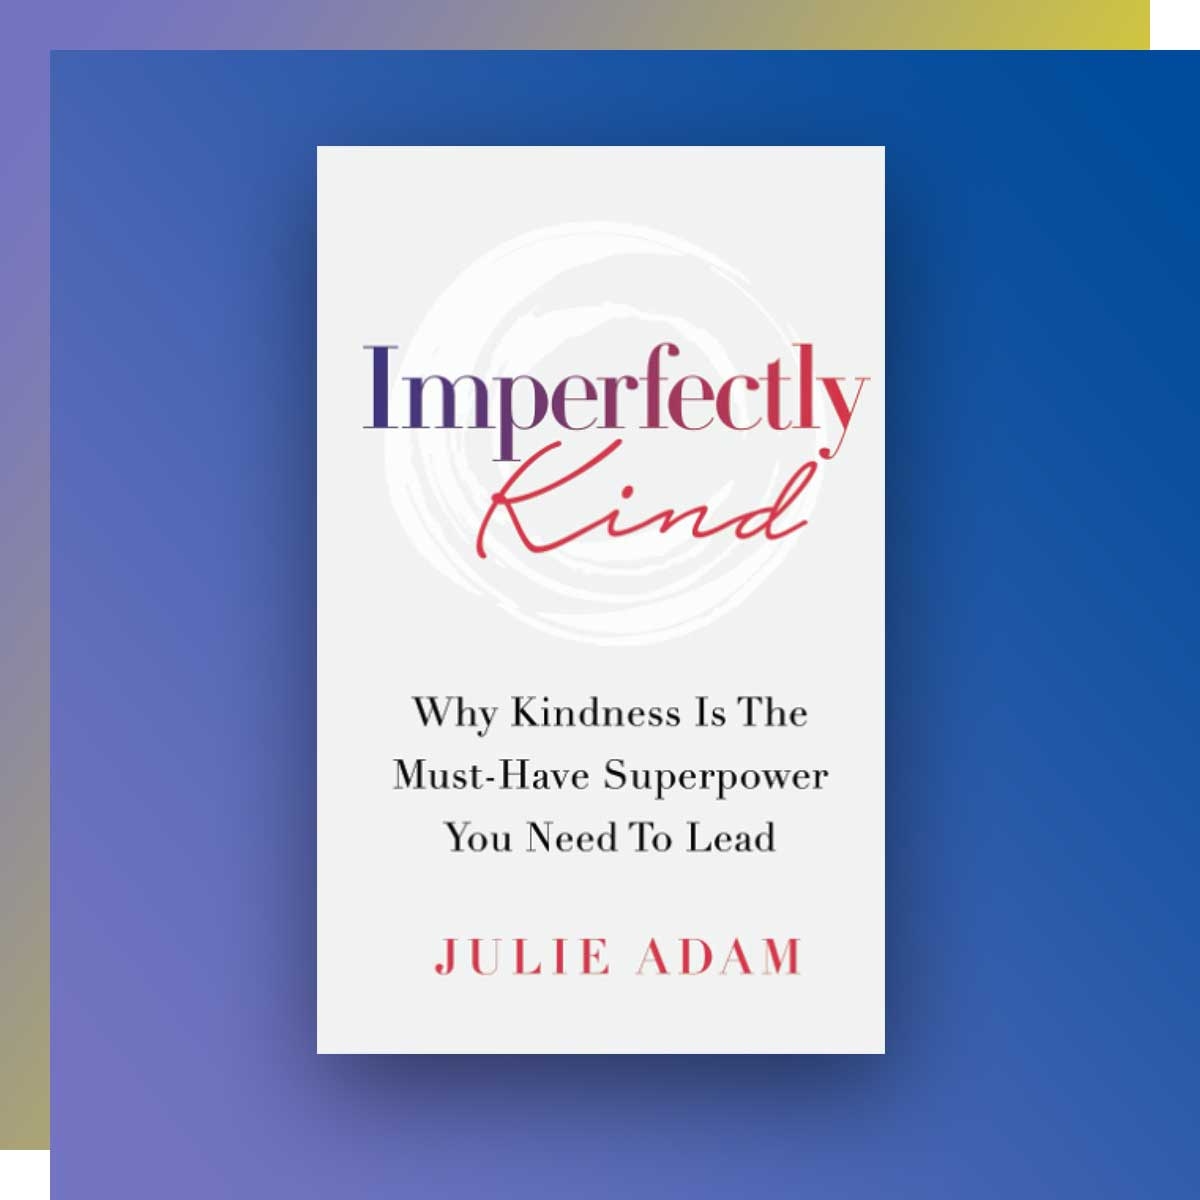 Imperfectly Kind: Why Kindness is the Must-Have Superpower You Need to Lead; Author: Julie Adam, Radio and Television Arts, ’92